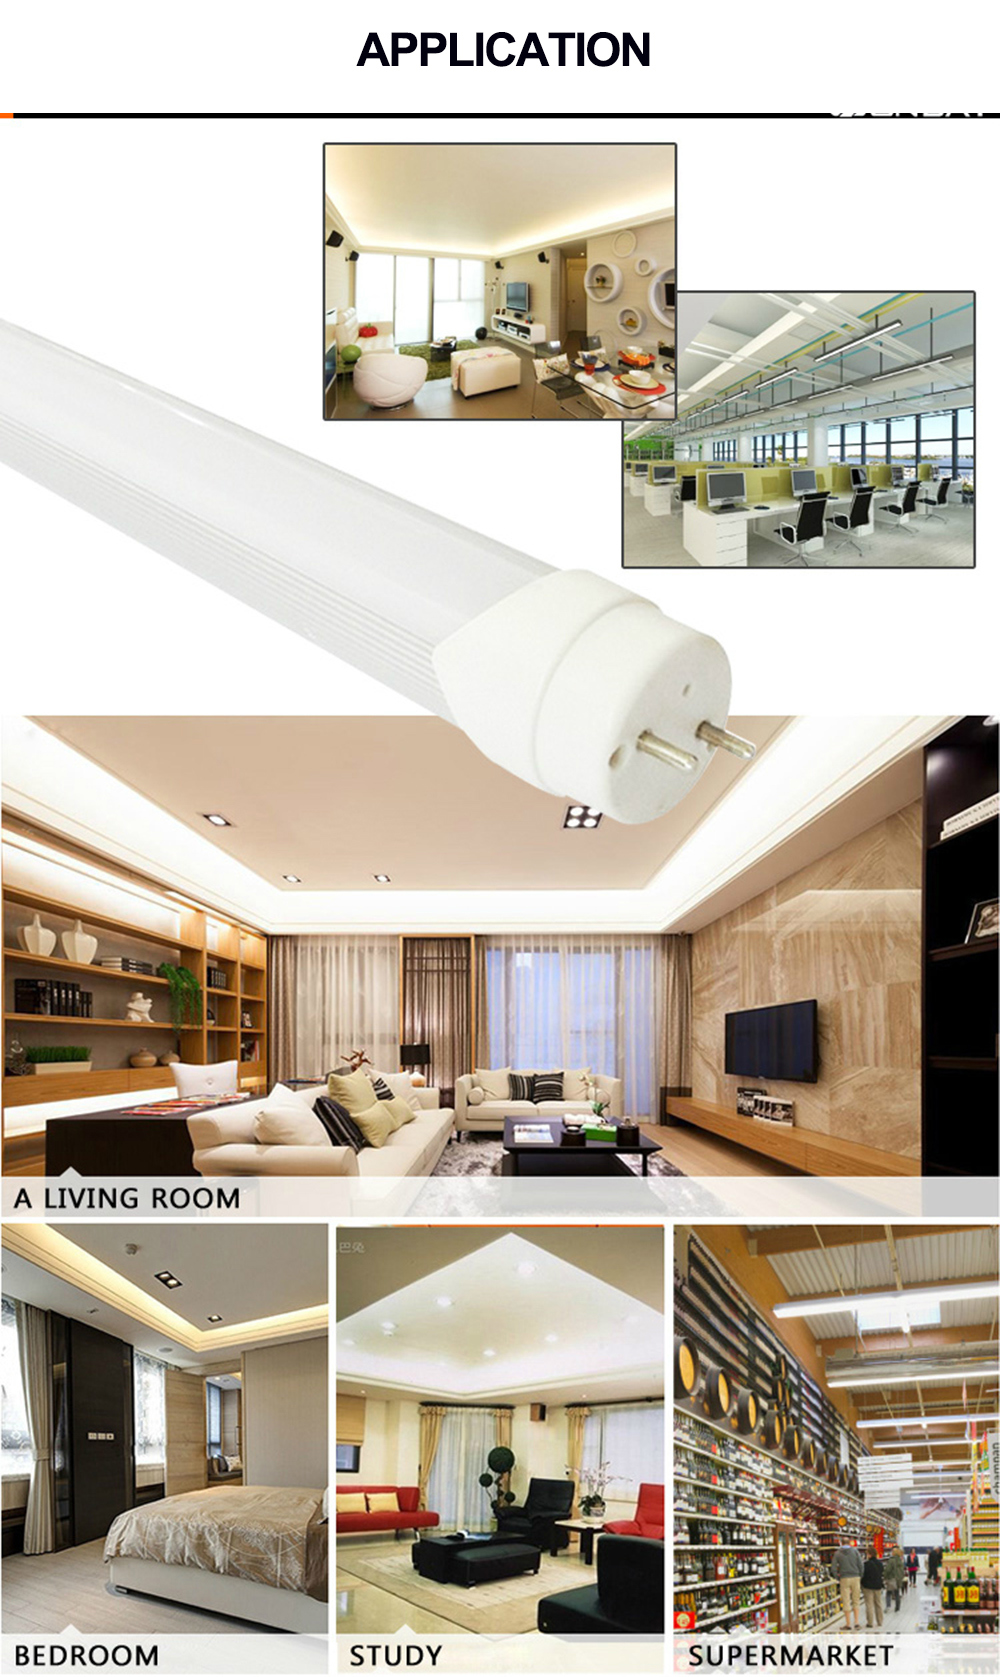 High Lumen Integrated T5 T8 300mm 600mm 900mm 1200mm LED Light Tube with Factory Price